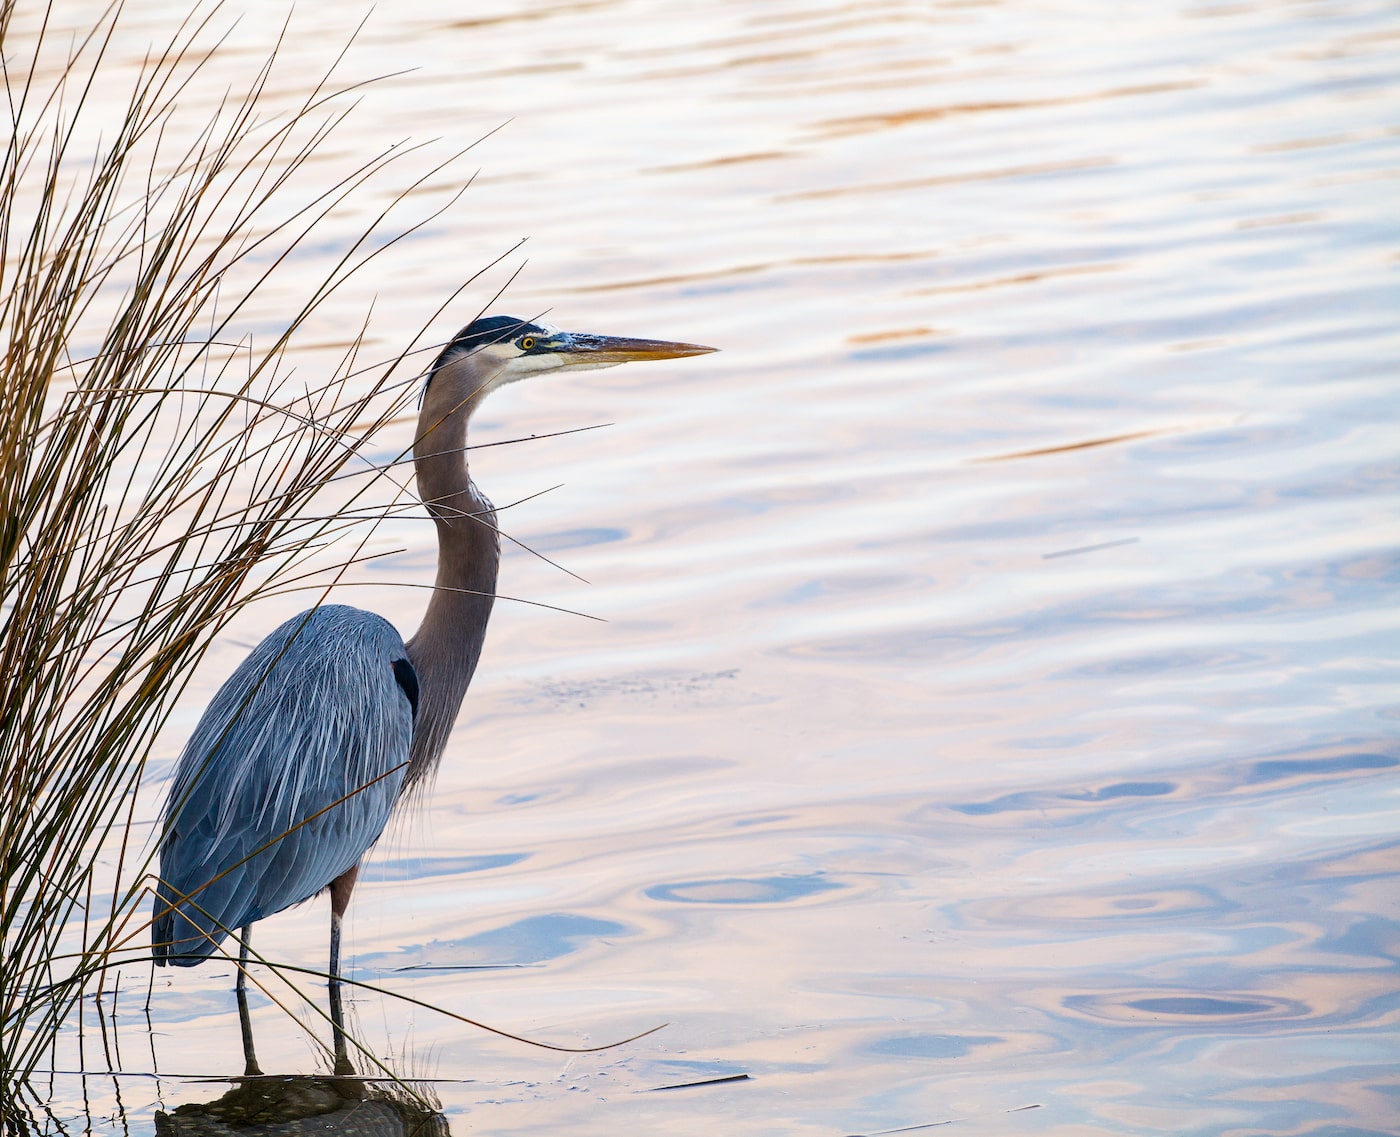 heron by the water